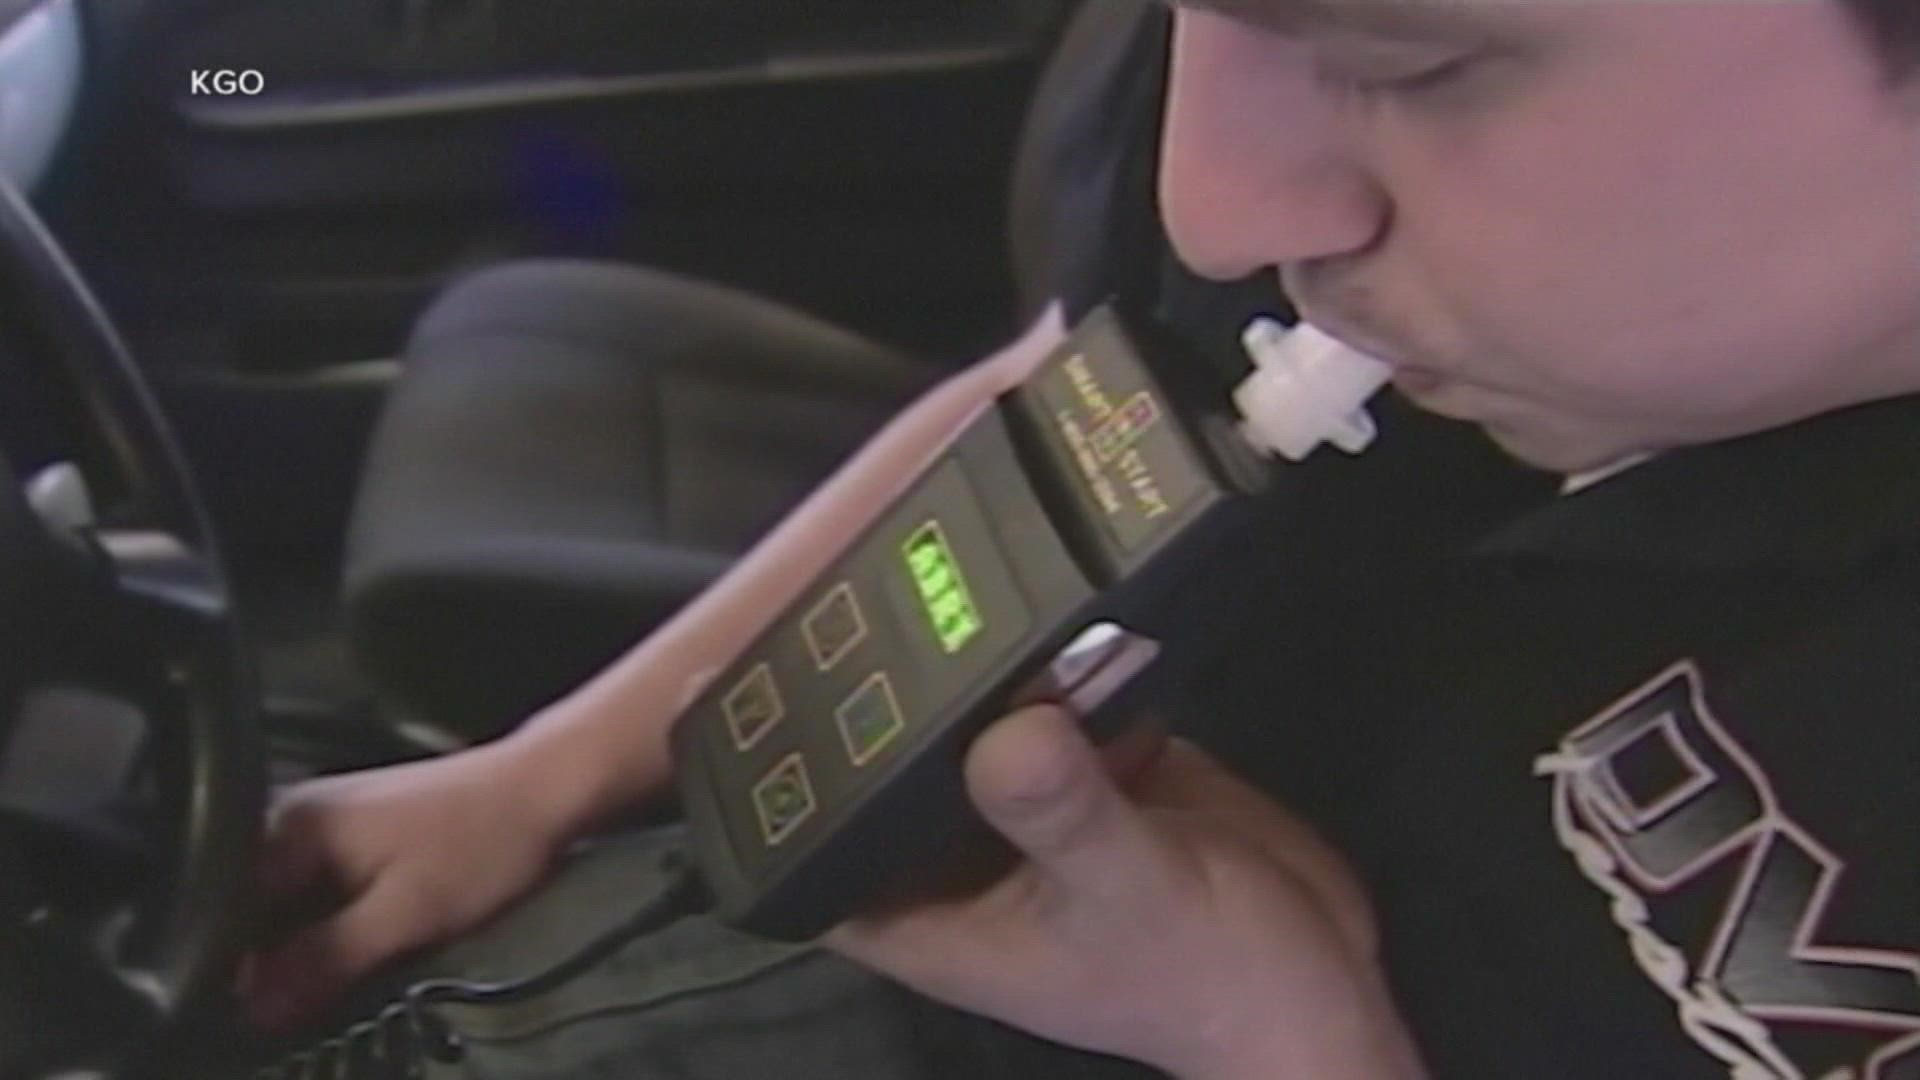 Some experts think breathalyzers in cars are the next step in vehicle safety.